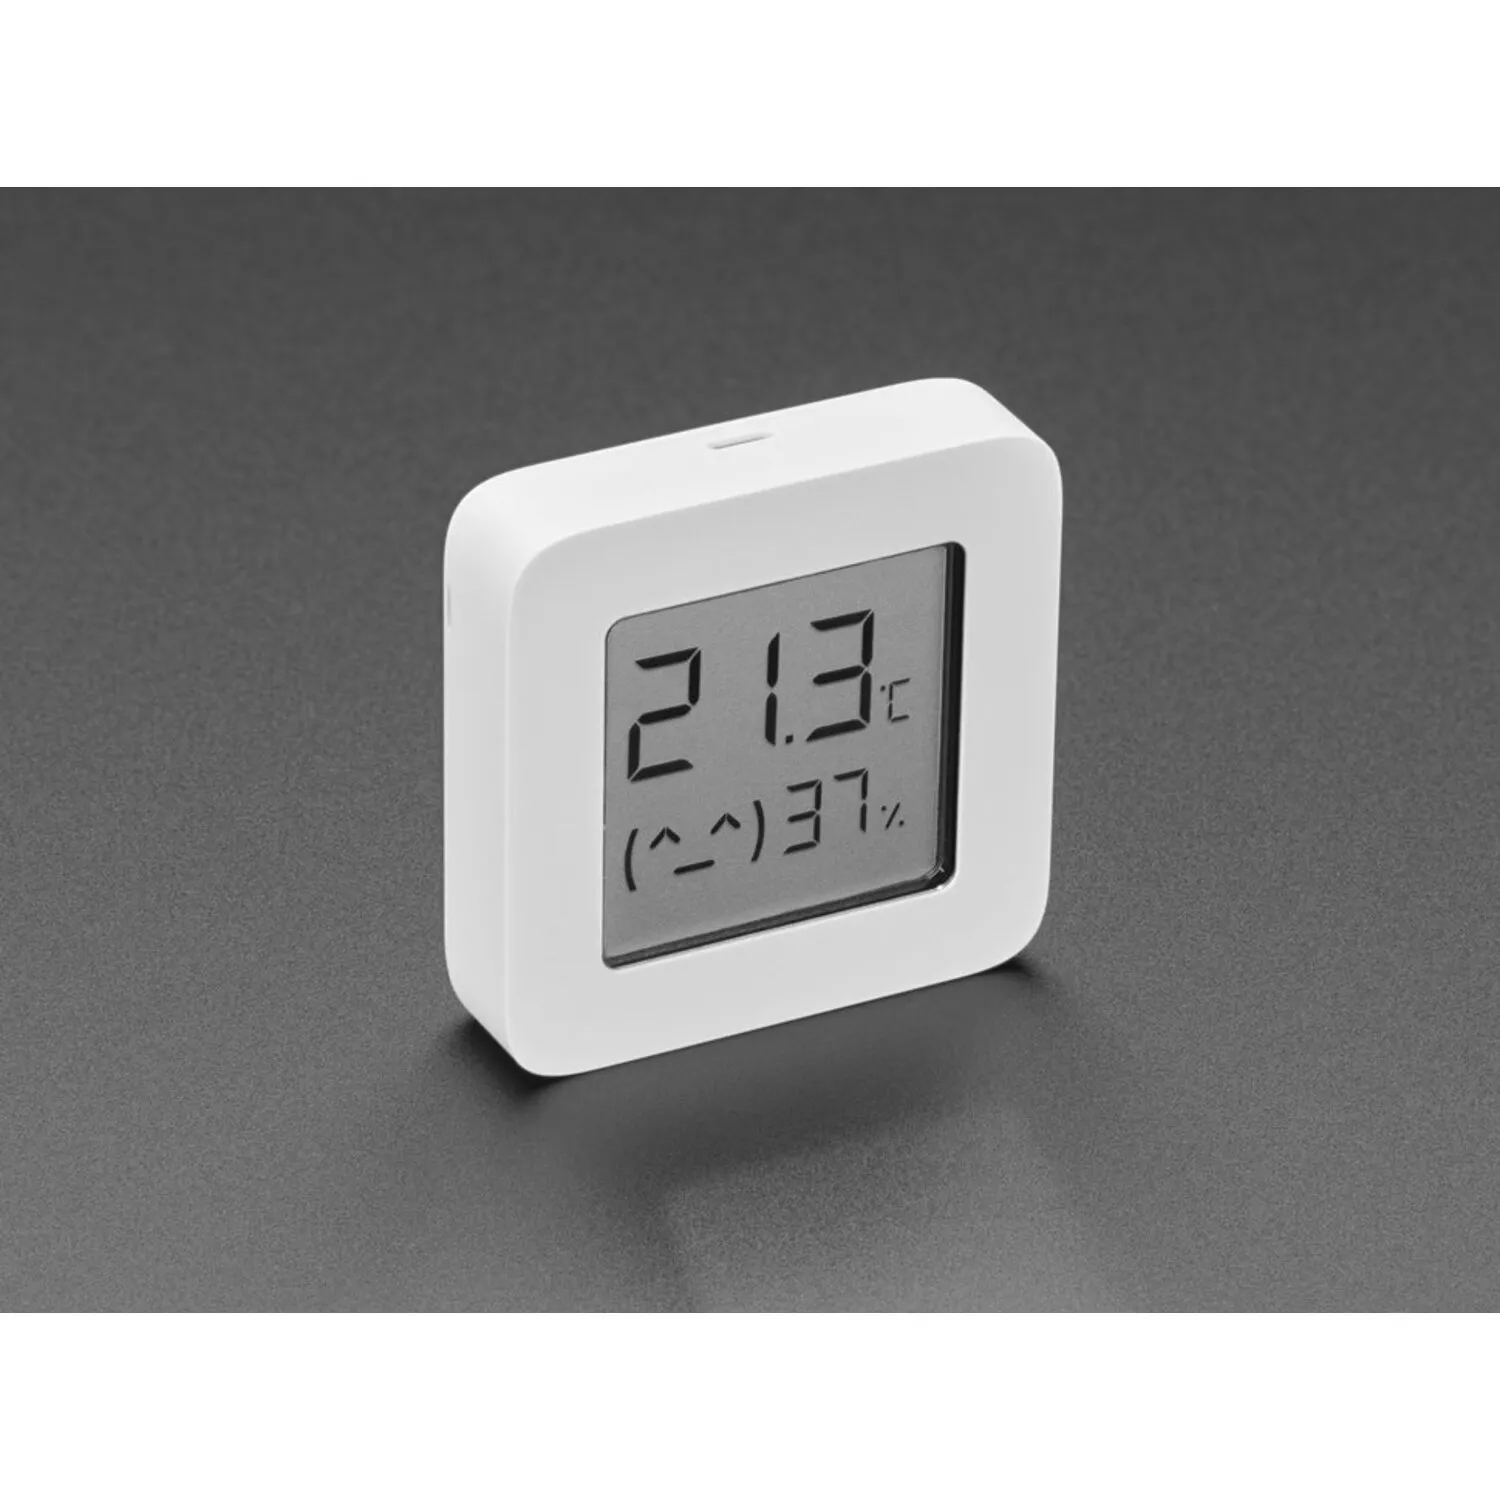 Photo of Mijia Bluetooth Temperature/Humidity Sensor with LCD Display